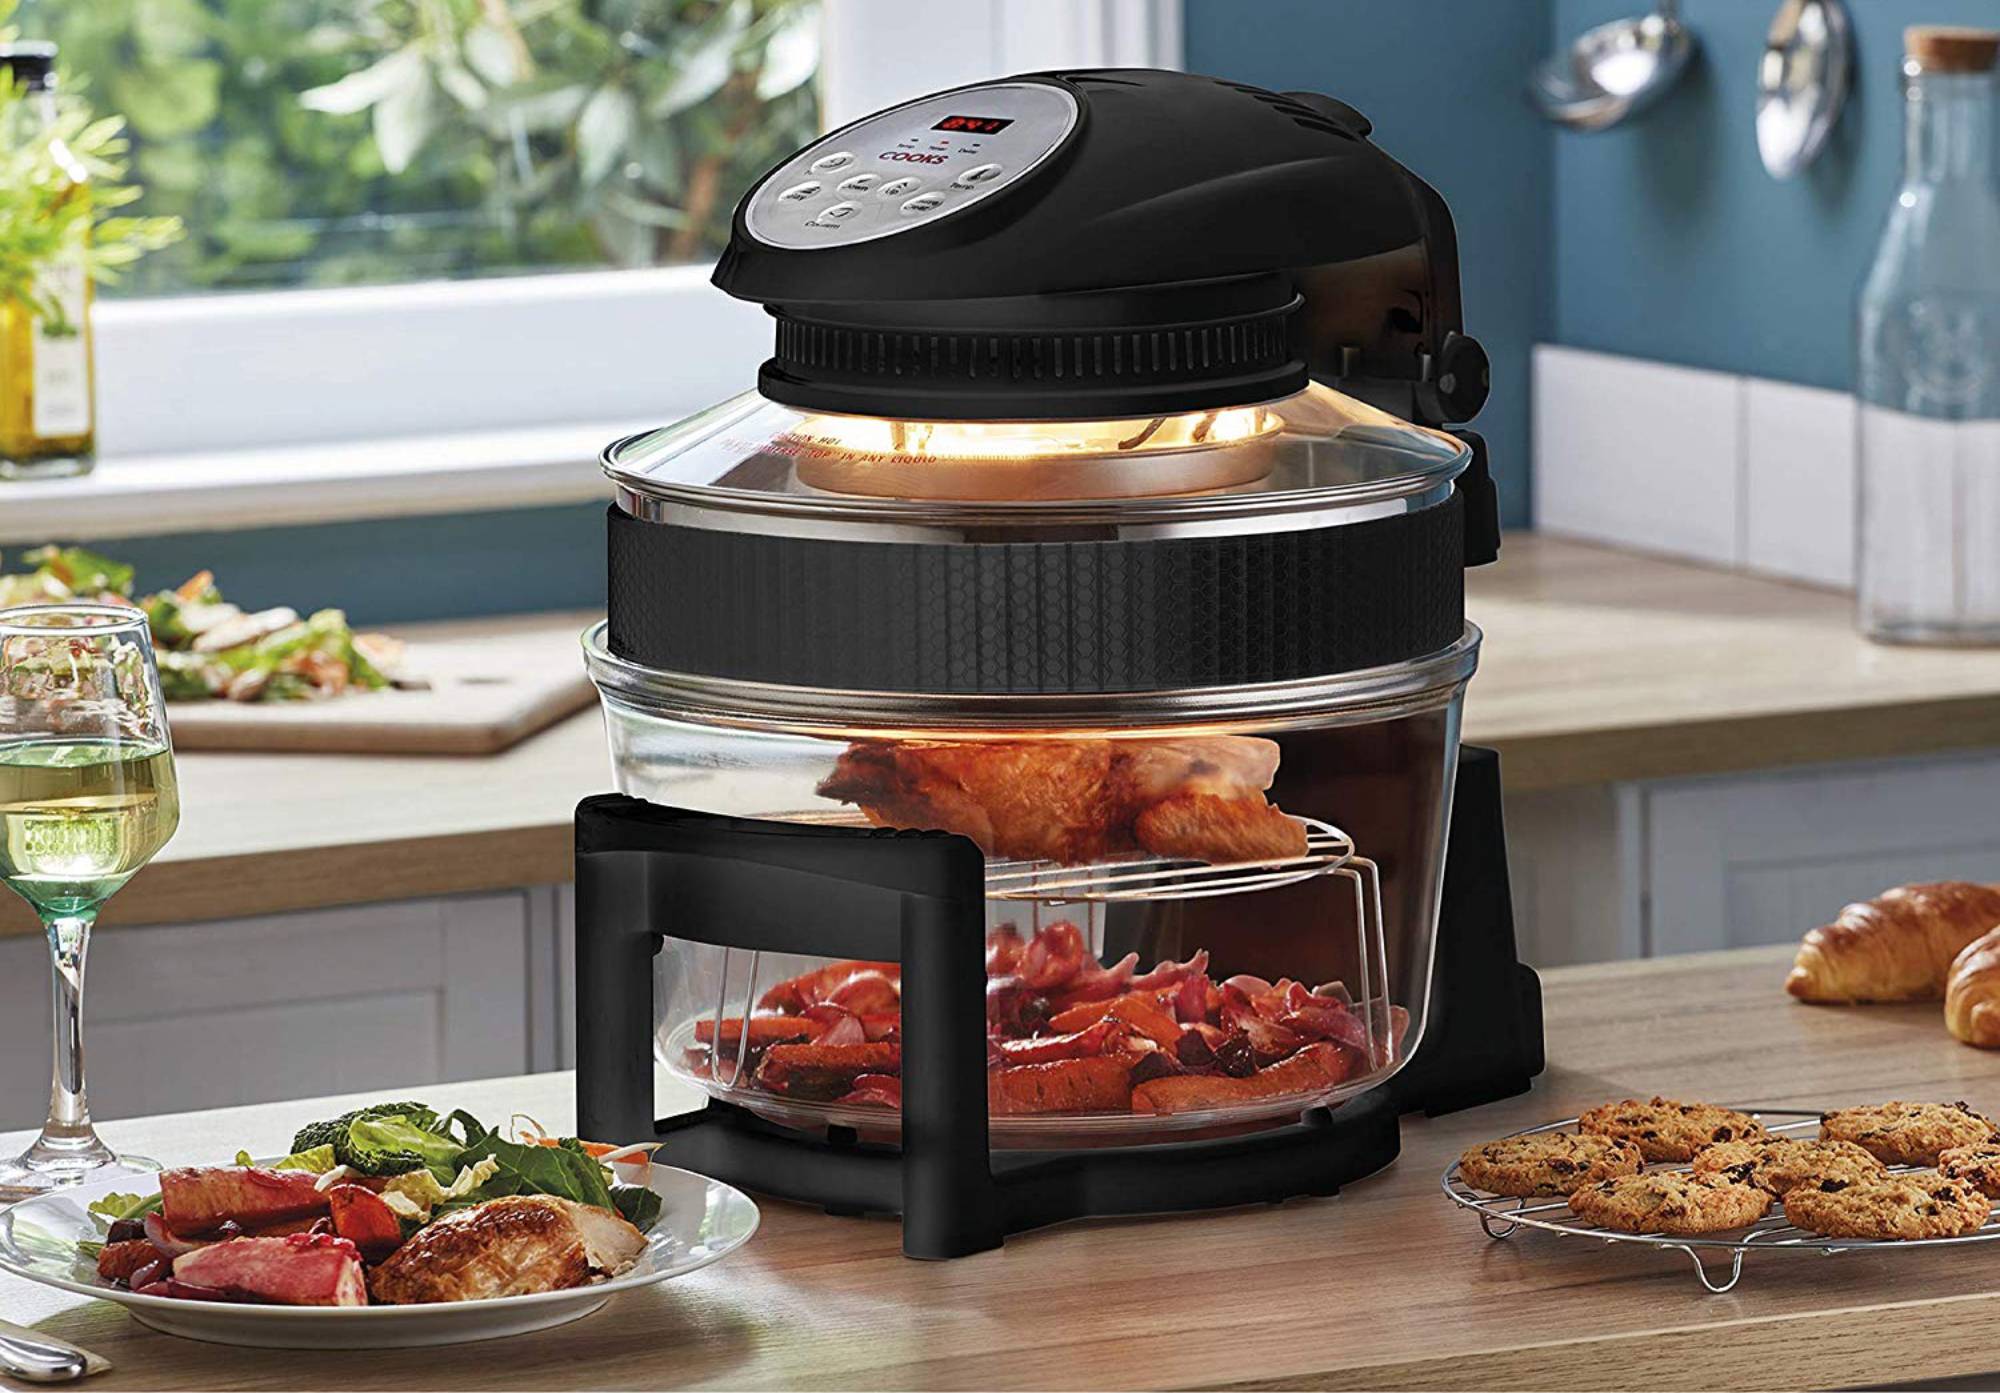 Does Halogen Oven Offer A Way To Make Healthful Food Fast